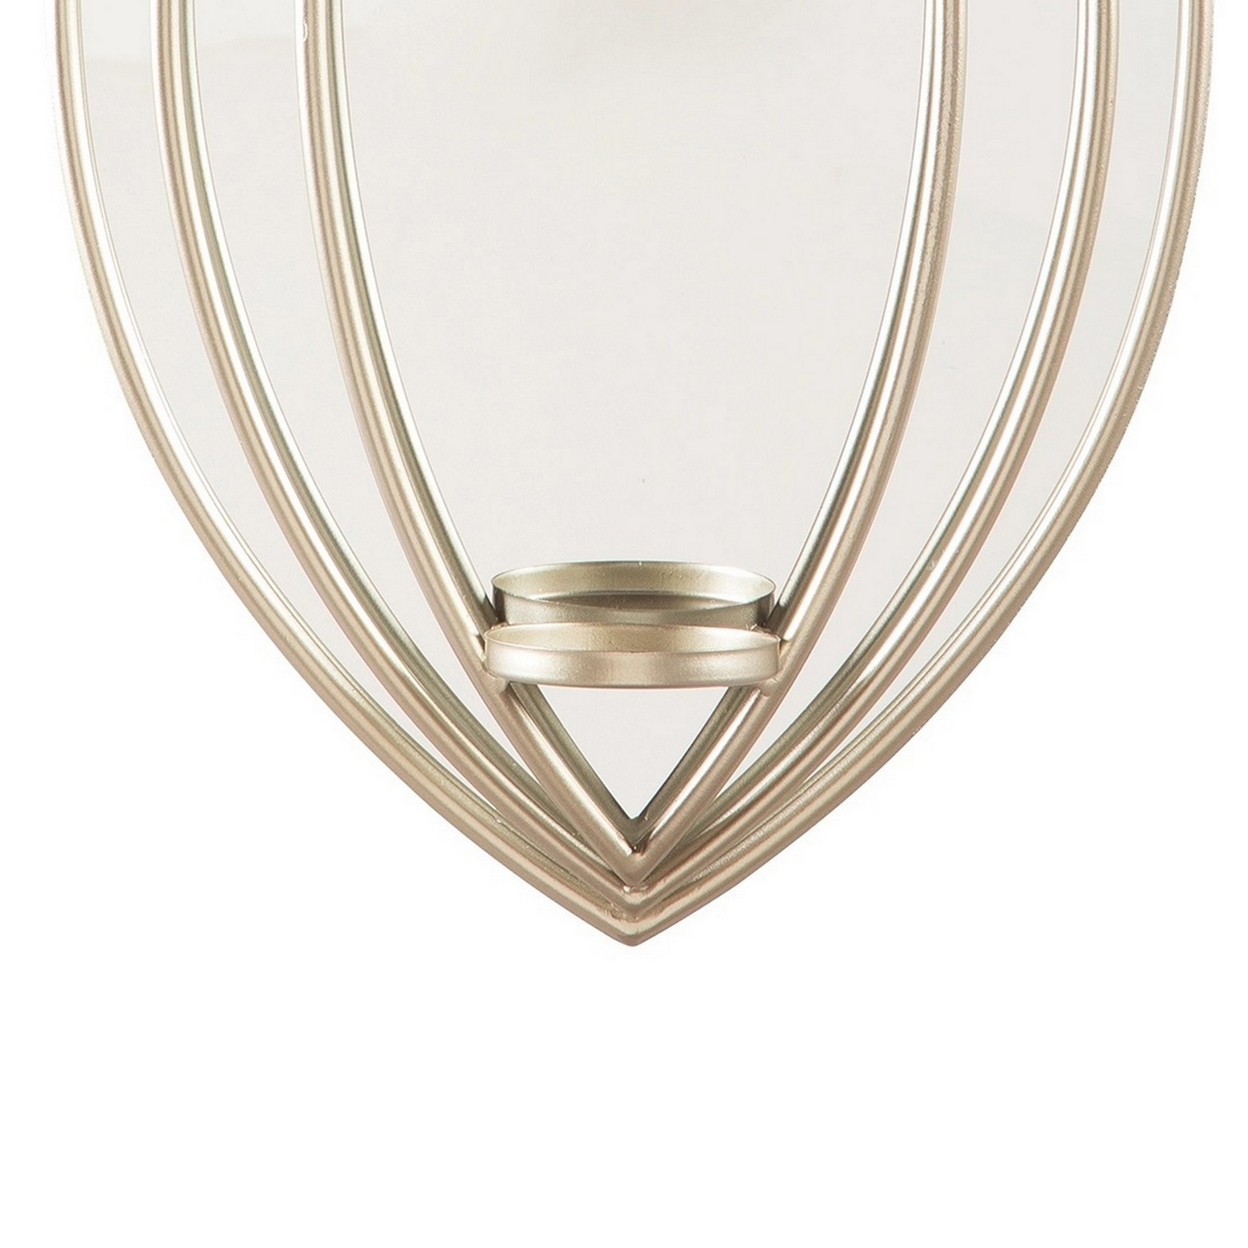 Caged Oval Metal Wall Sconce With Mirror Insert, Silver- Saltoro Sherpi